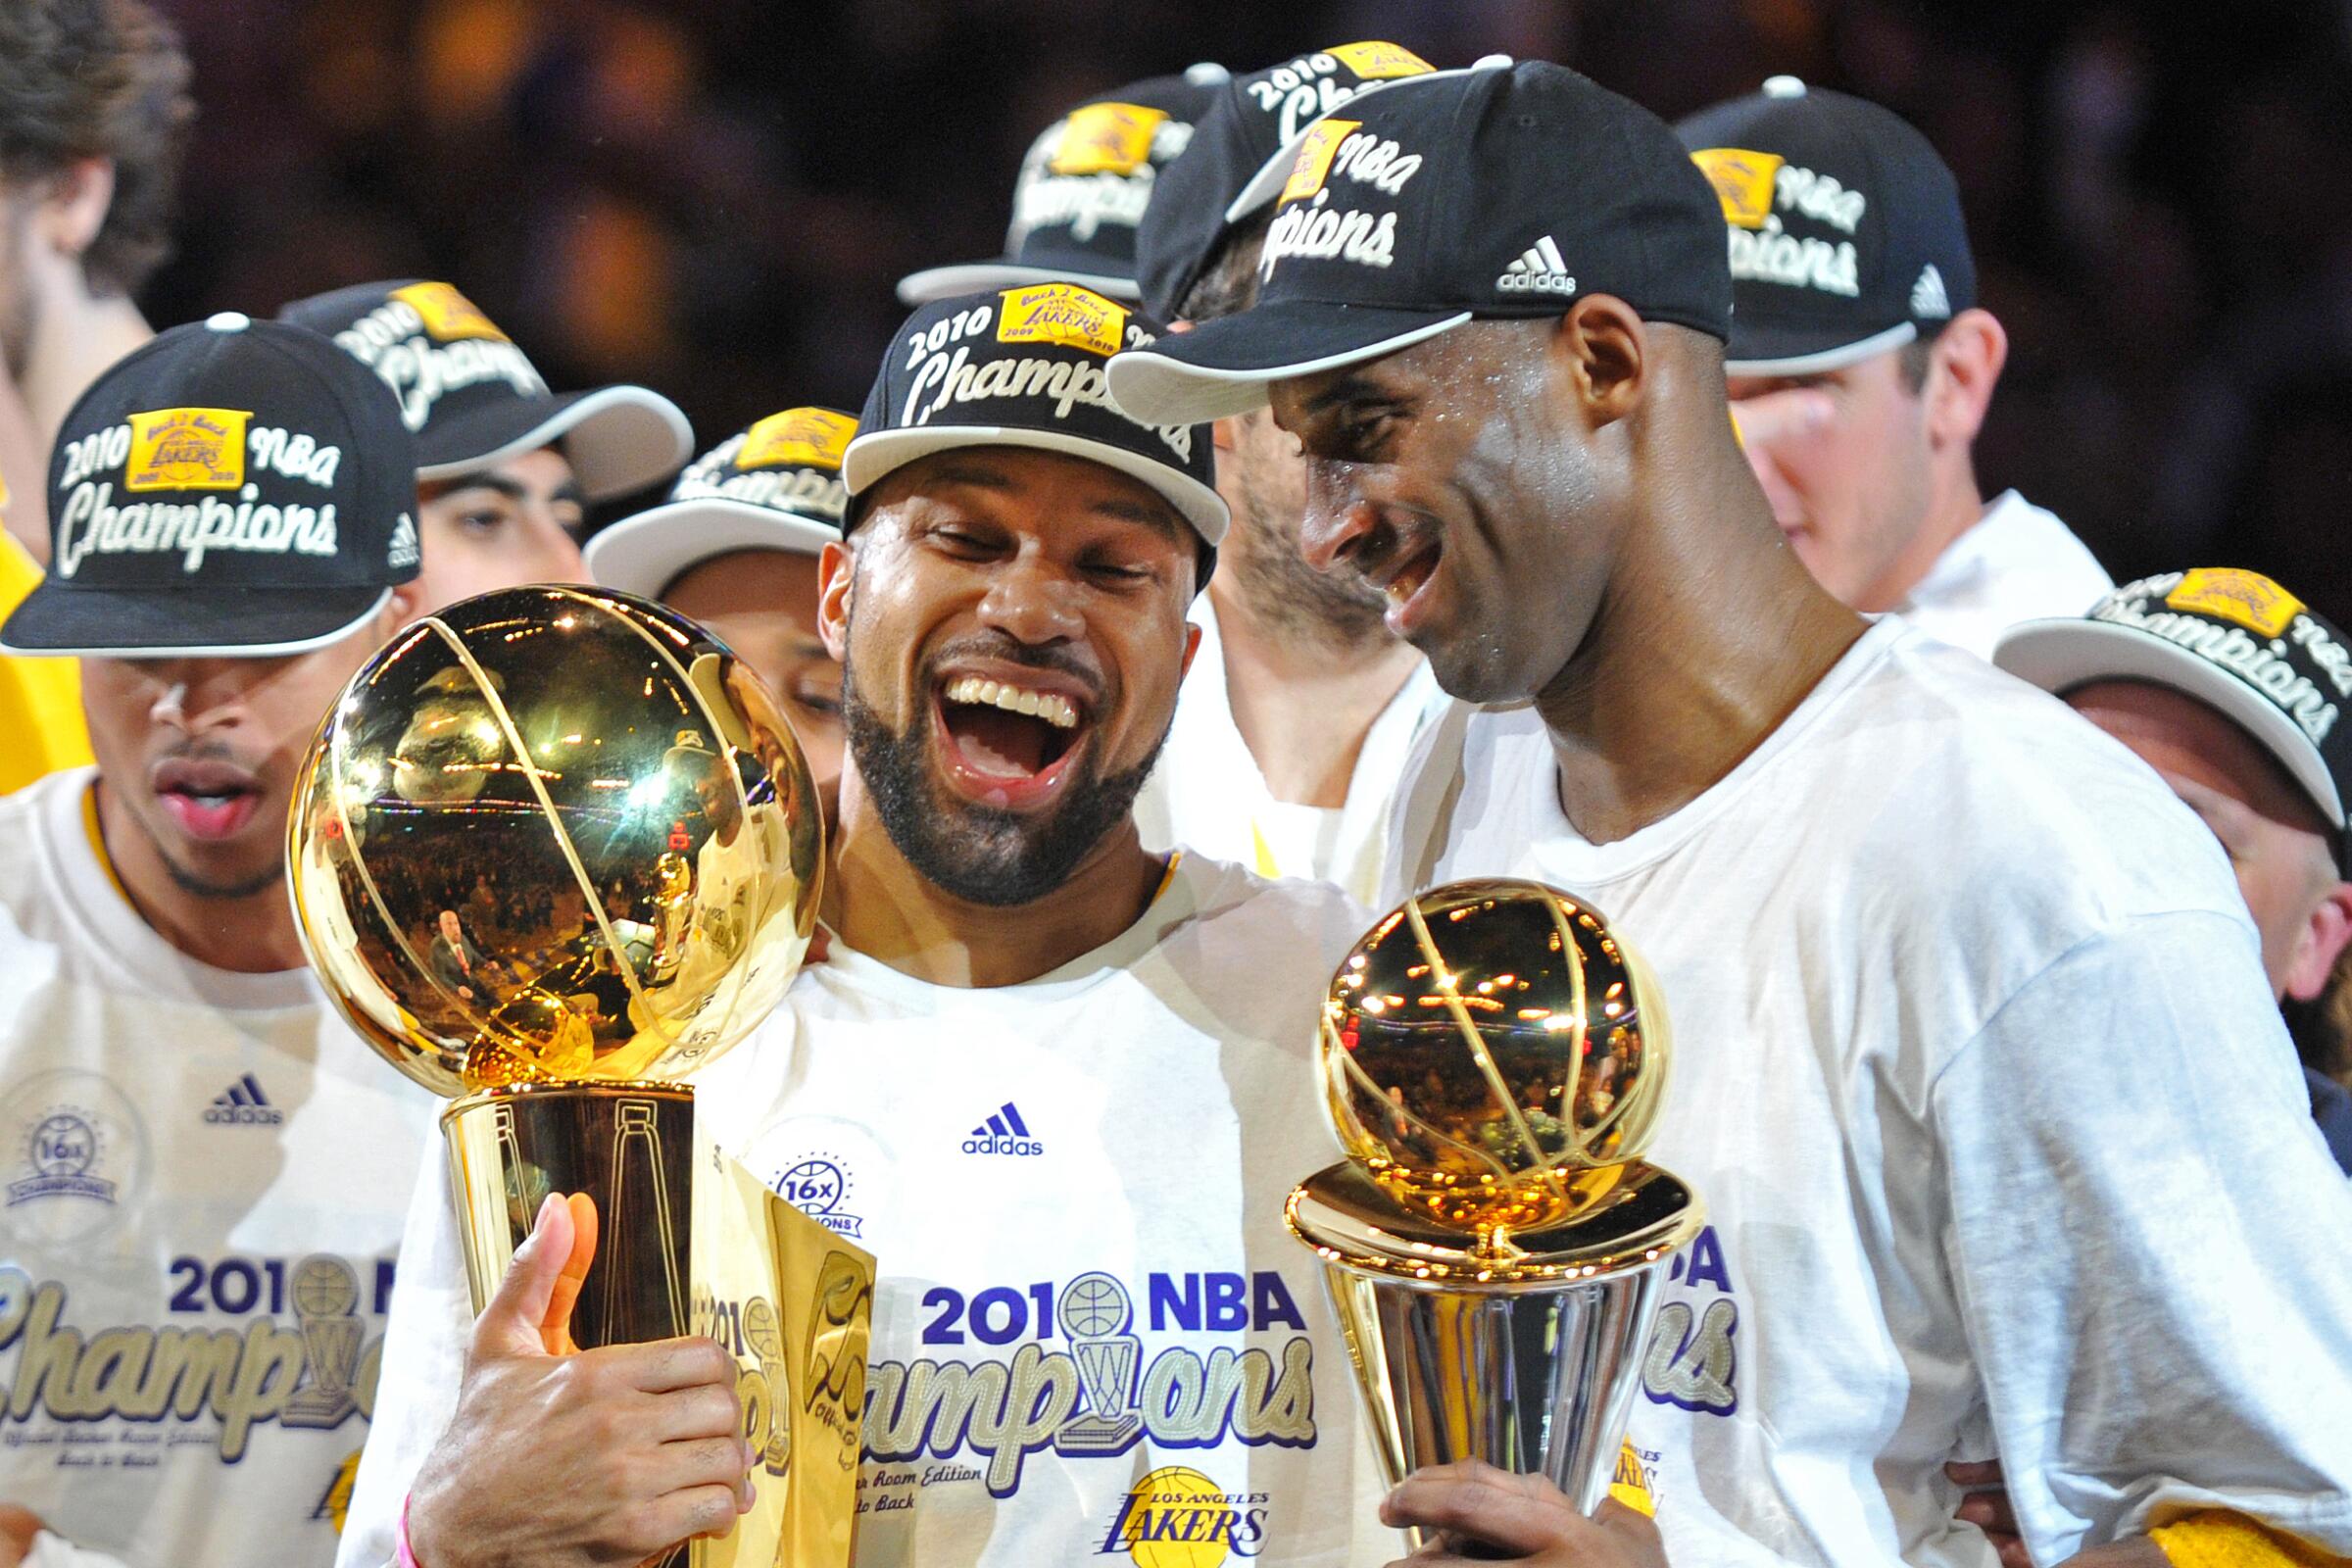 Lakers guards Derek Fisher and Finals MVP Kobe Bryant hold the trophies as they celebrate winning the 2010 NBA title.